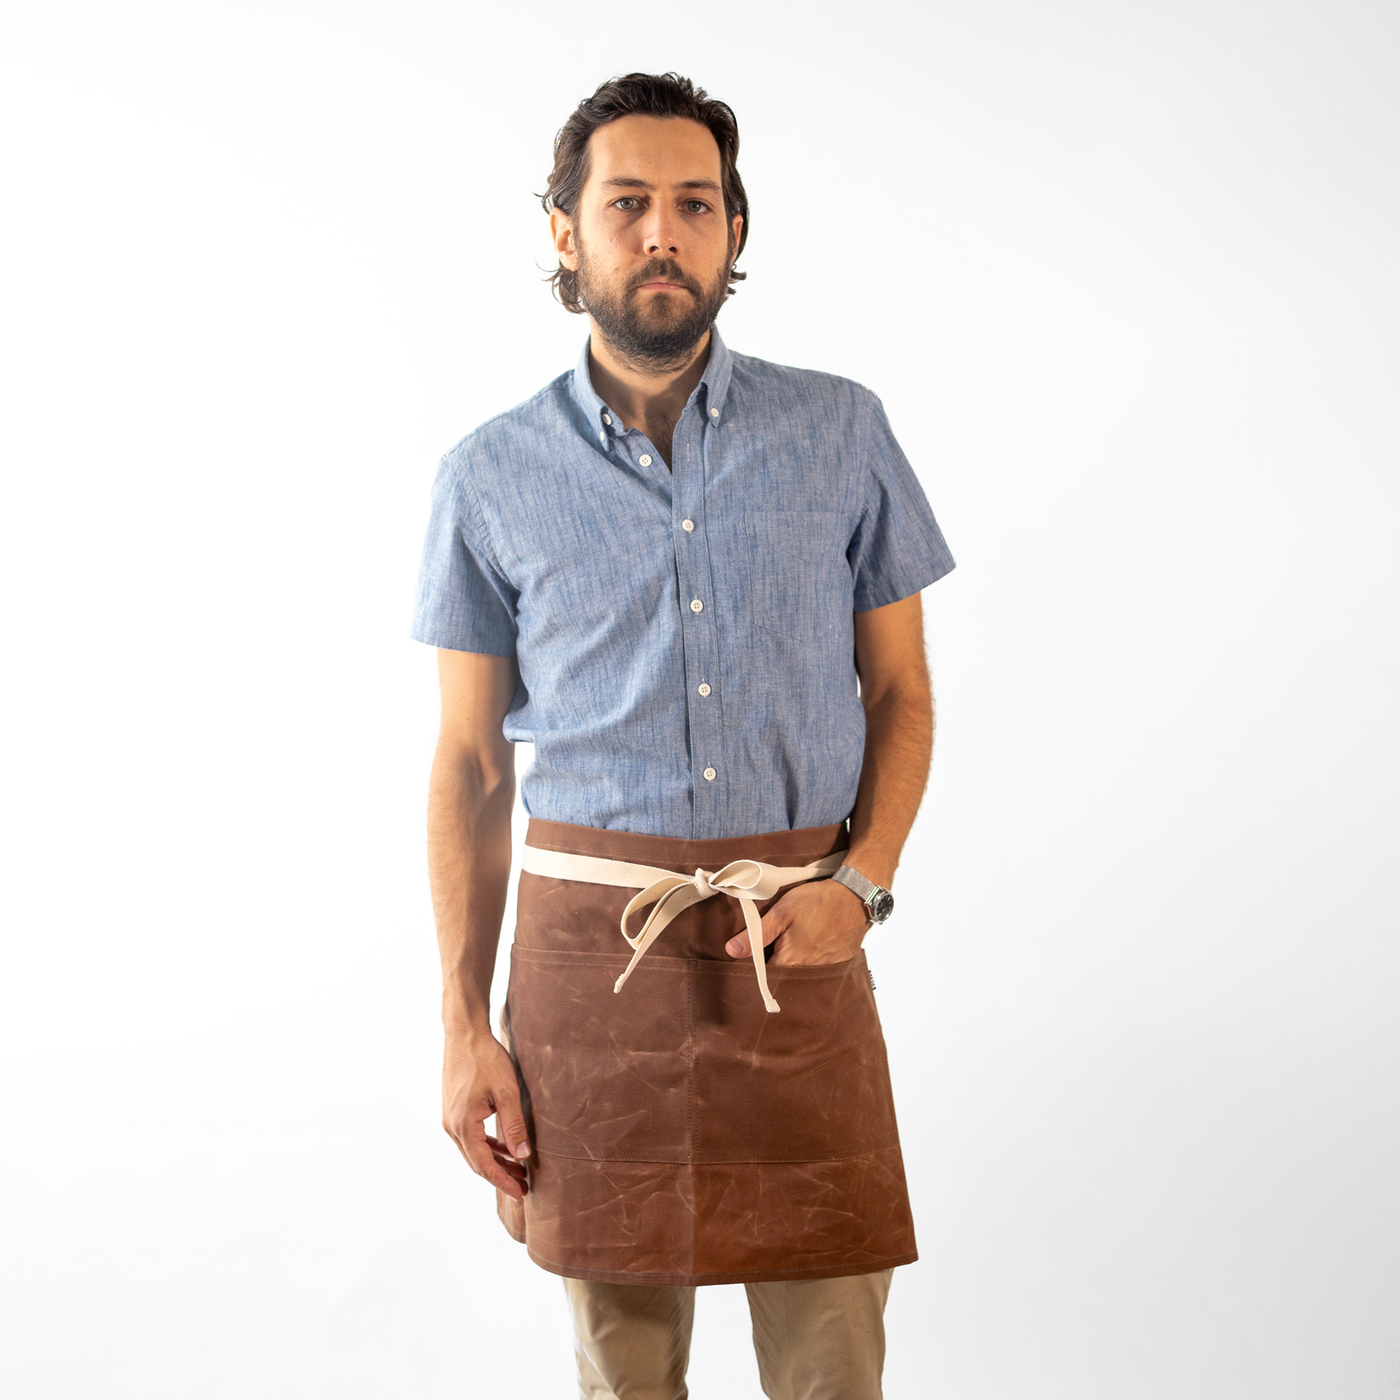 Waxed Canvas and Leather Apron - Brown